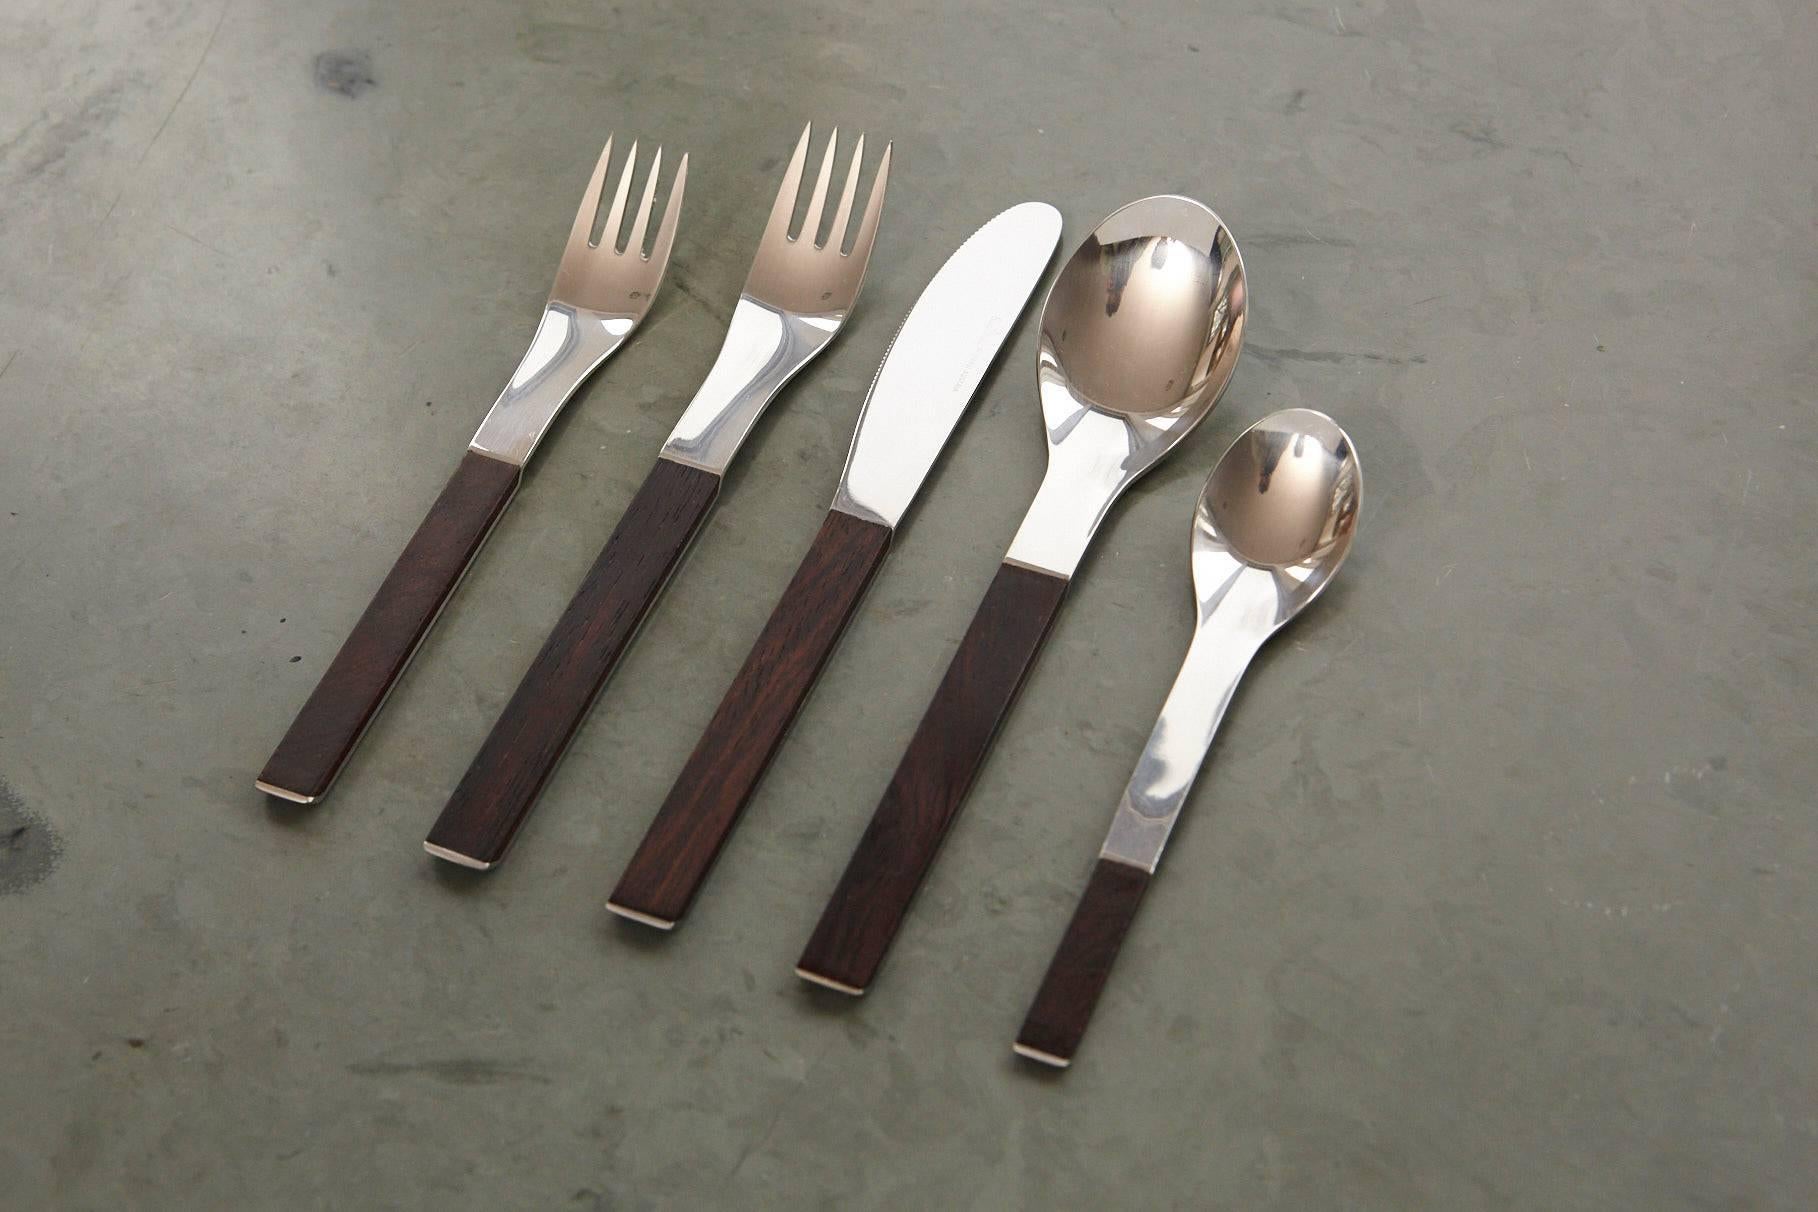 Exceptional rosewood and stainless steel flatware set 'Duo' for 12 place settings designed by Carl Auböck and made by Amboss Neuzeug Hammer Company for Rosenthal Austria, circa 1967.
Each set is composed of five pieces (fork, knife, spoon, salad or